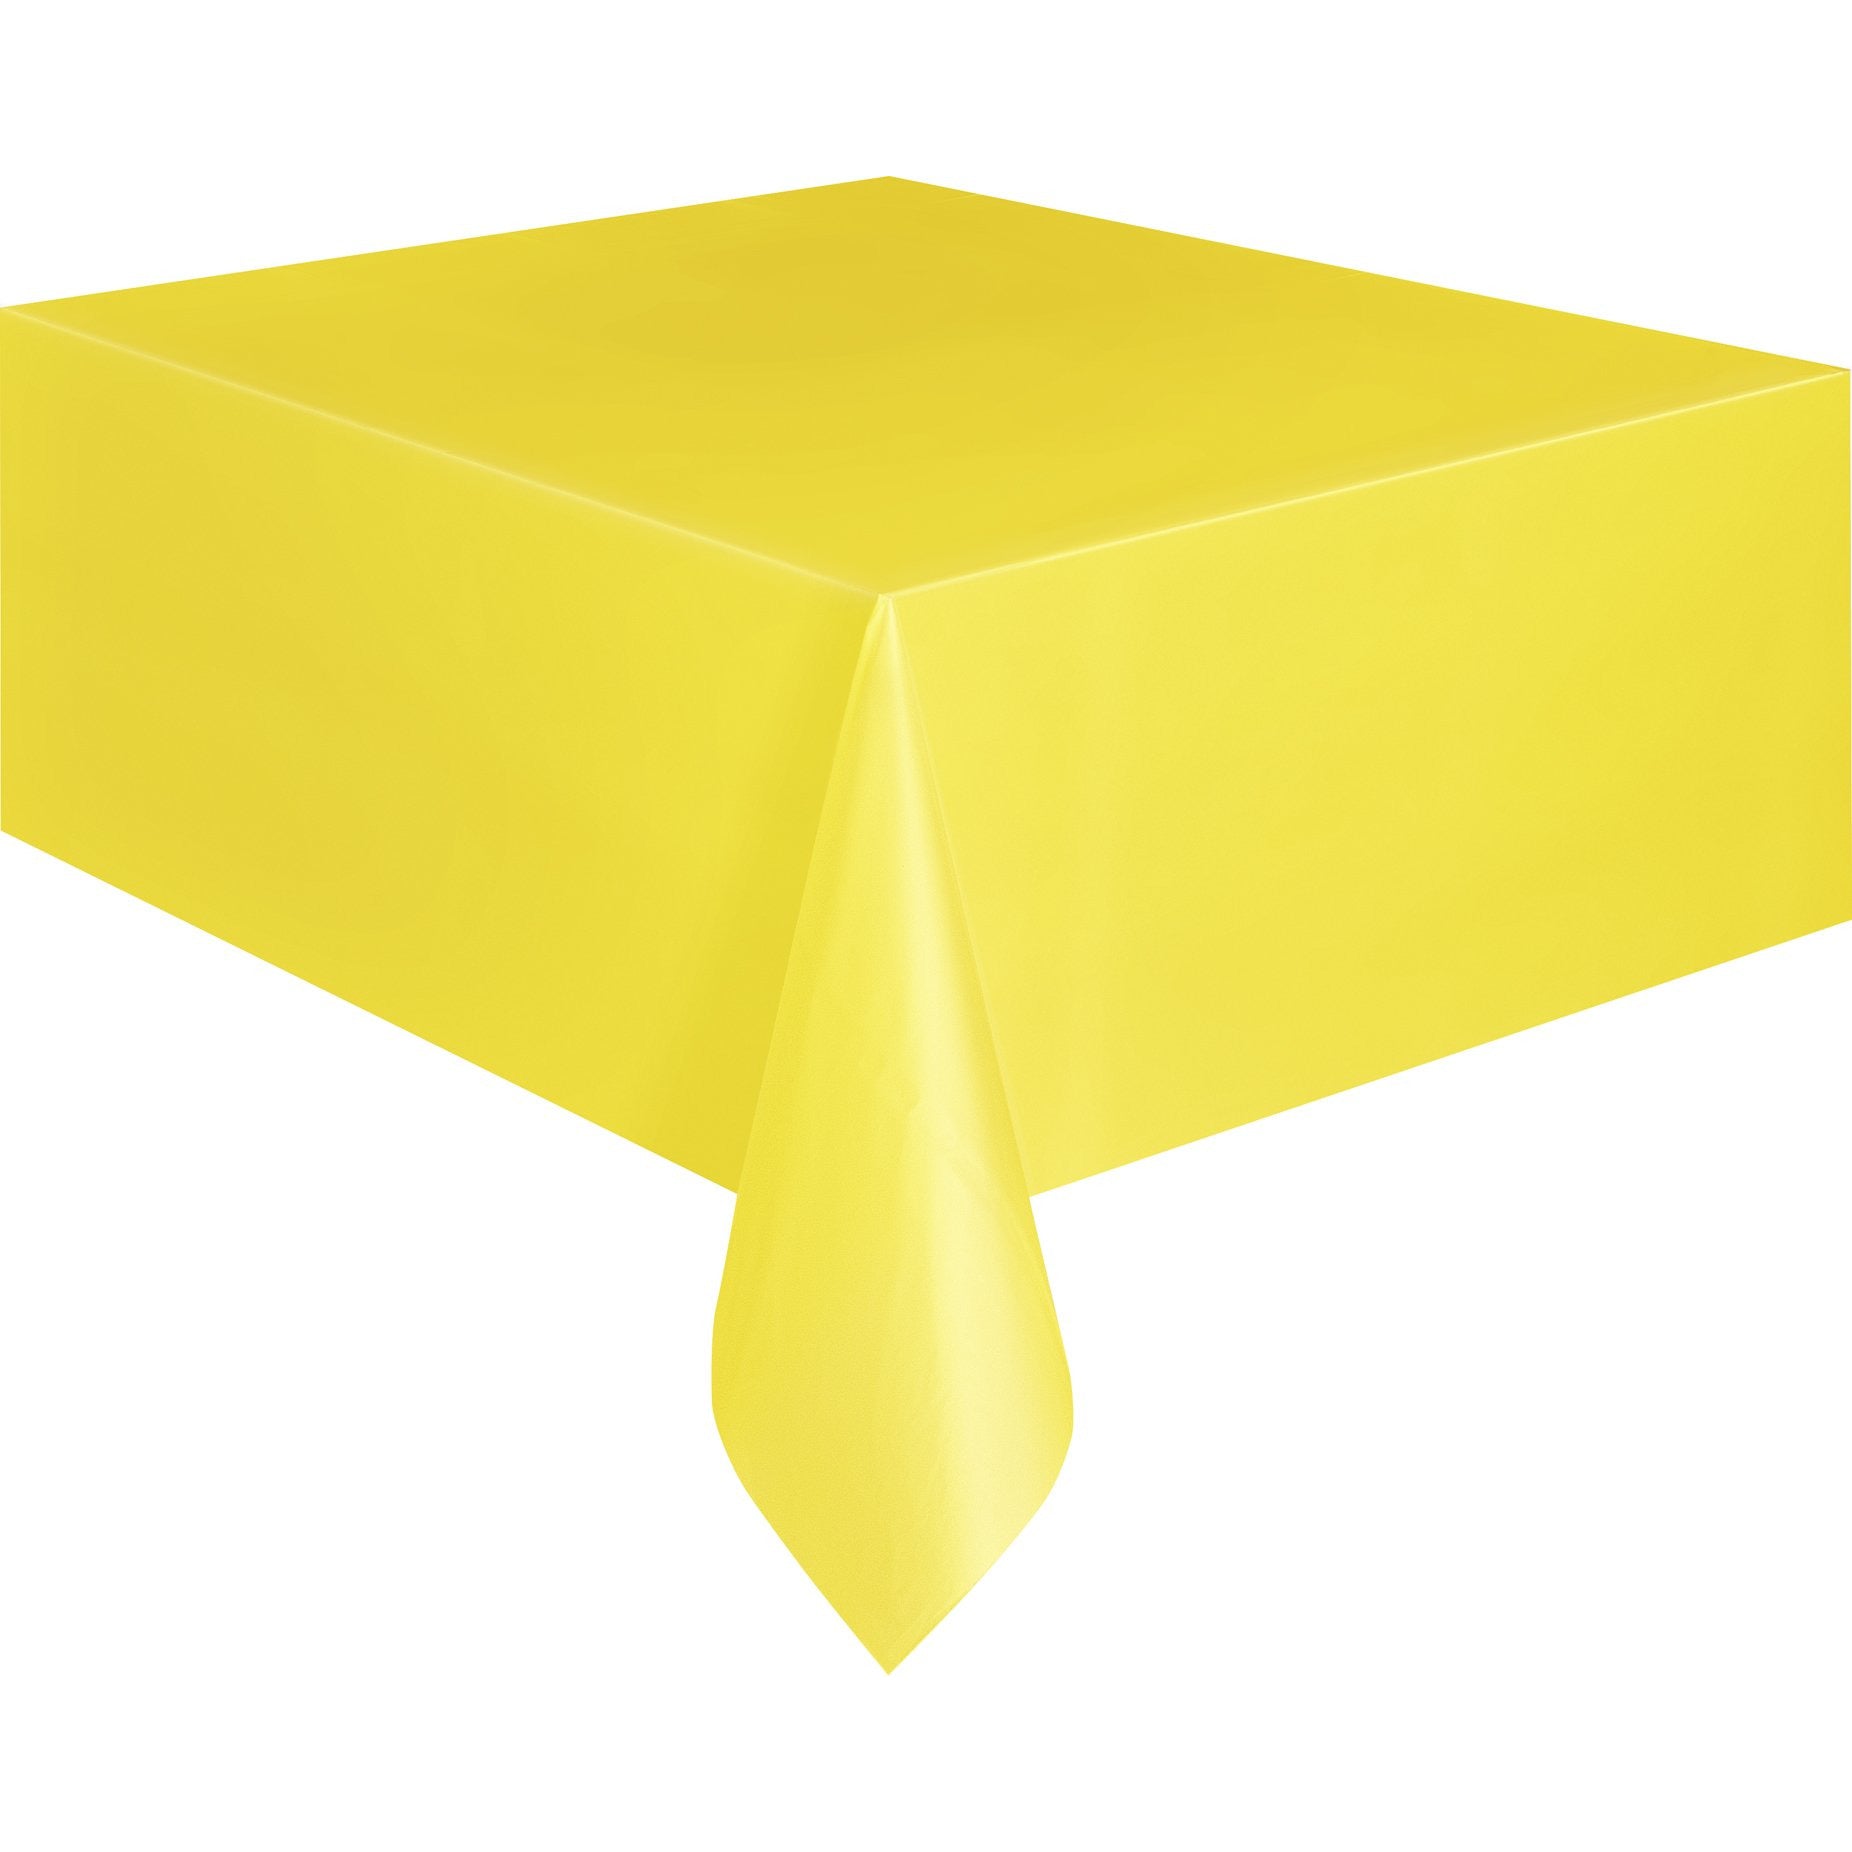 Plastic Tablecover - Sunflower Yellow - Dollars and Sense